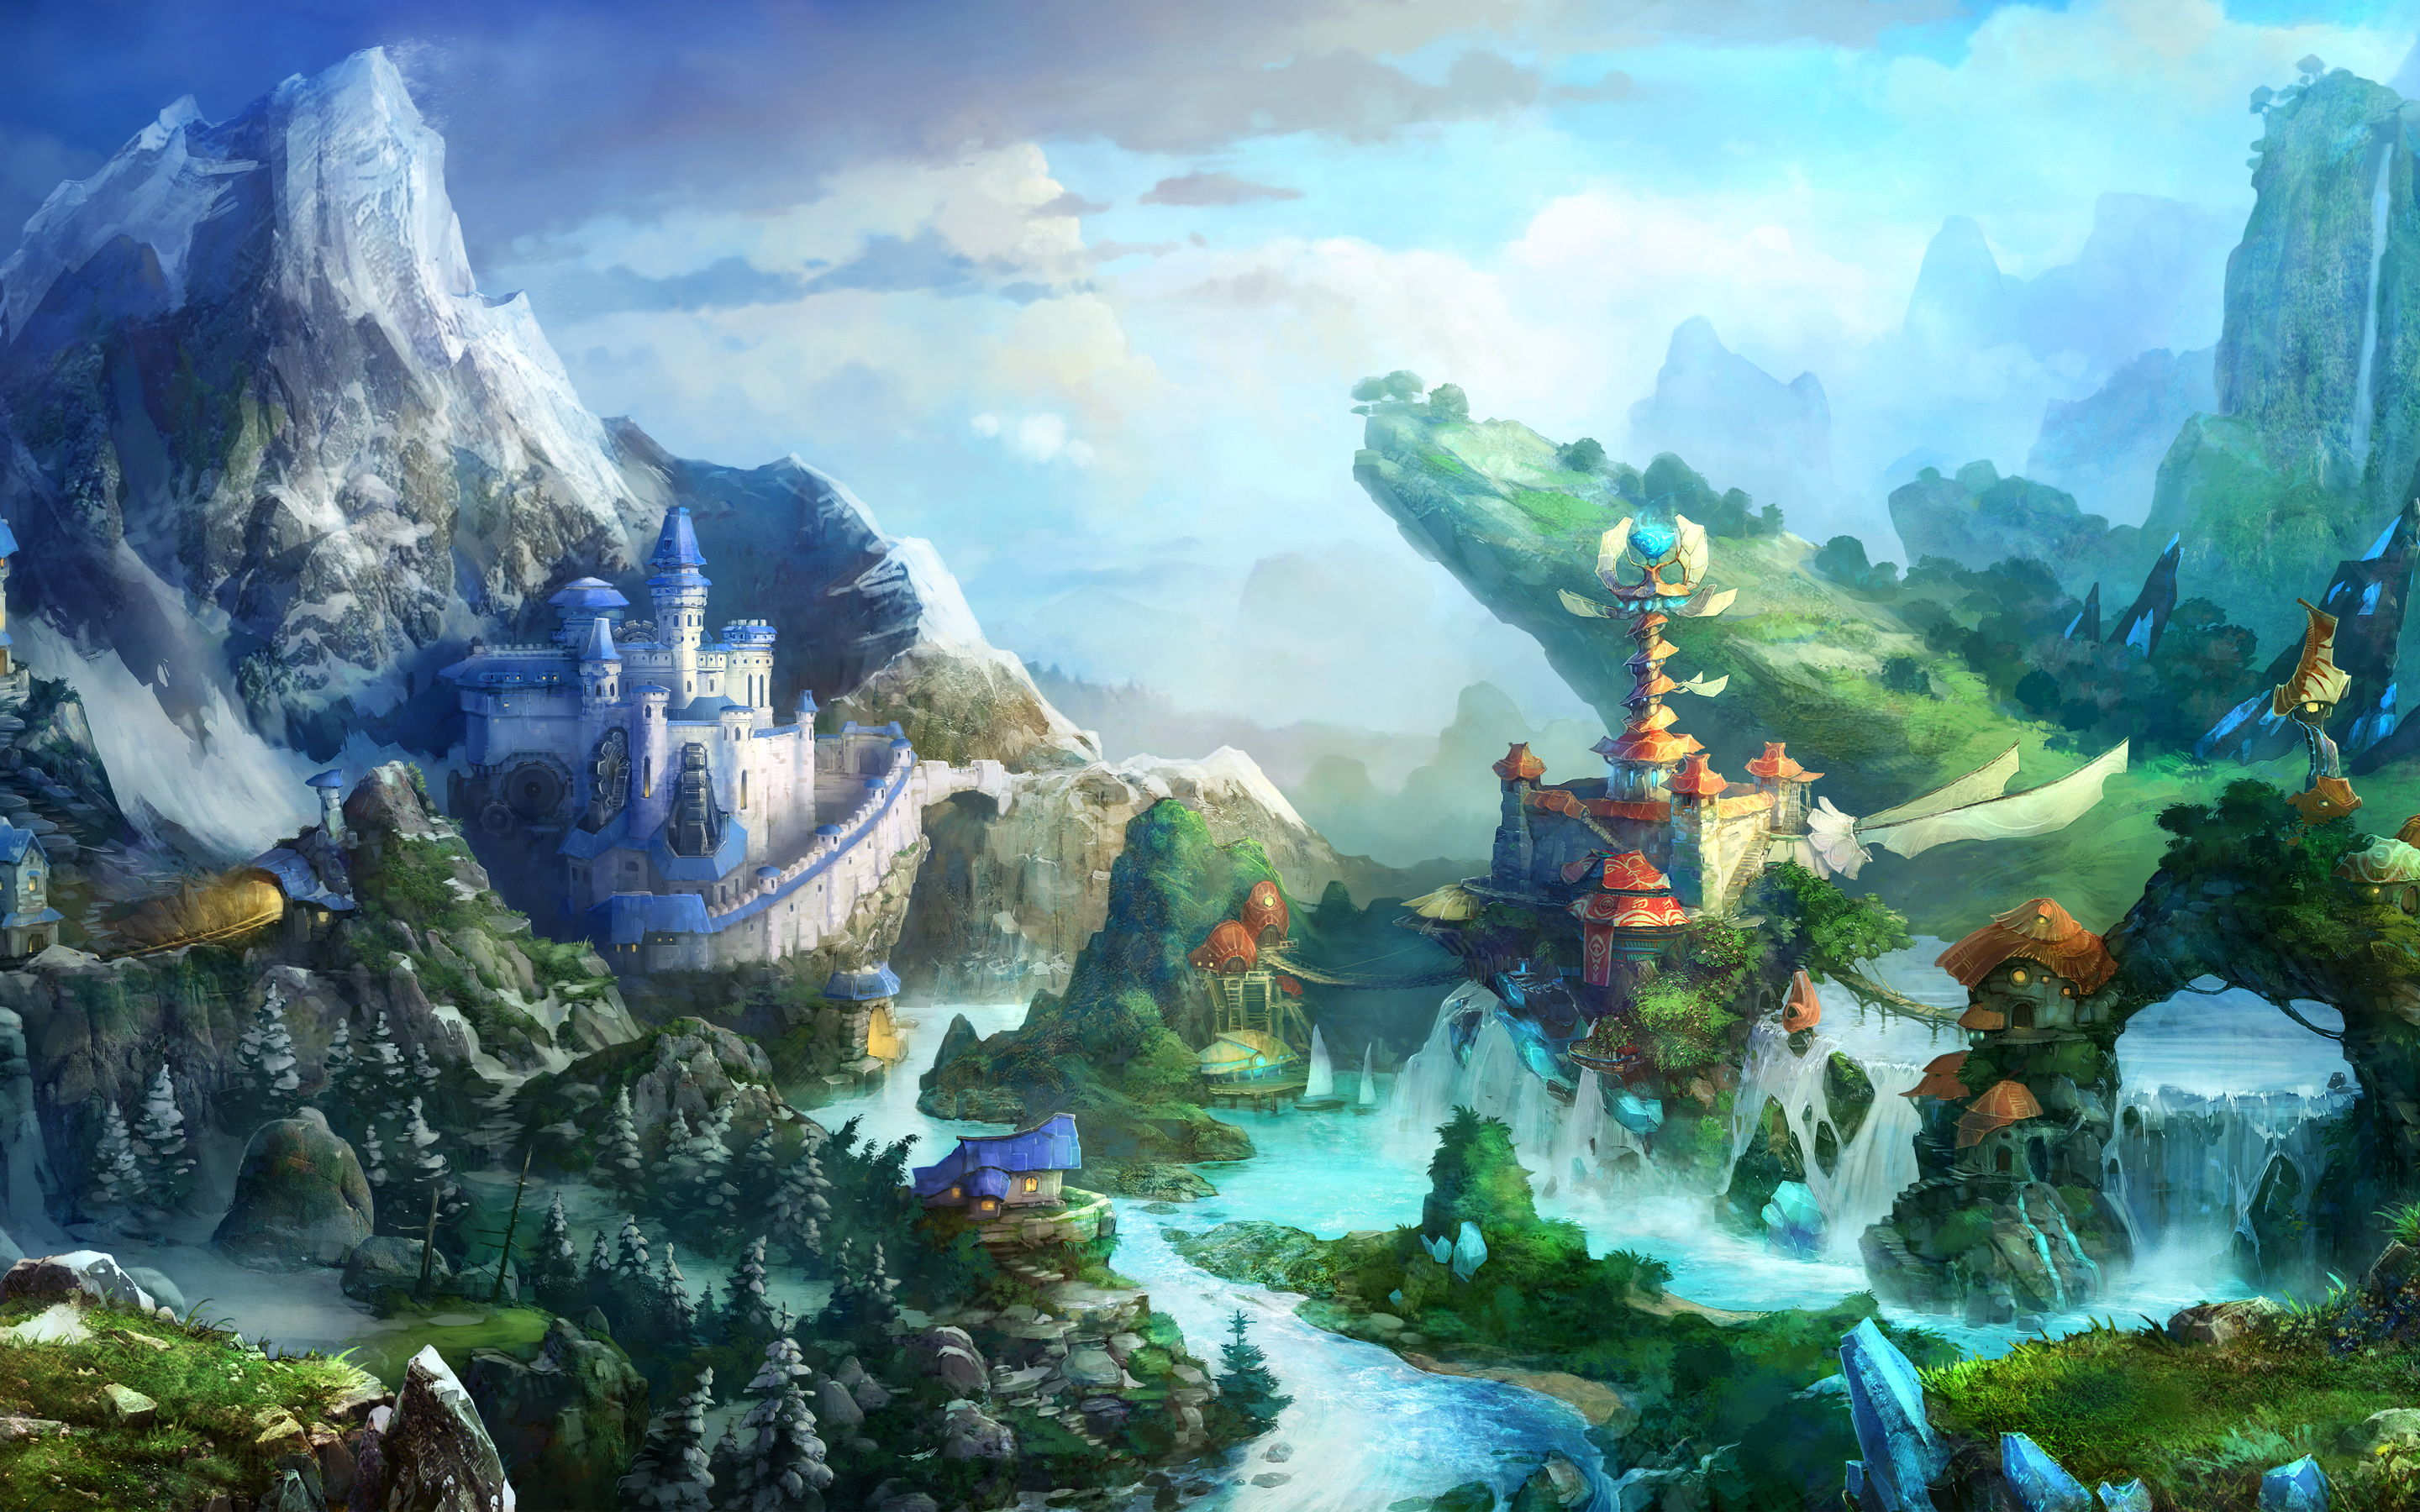 Gorgeous Fantasy World By HD Wallpaper Daily